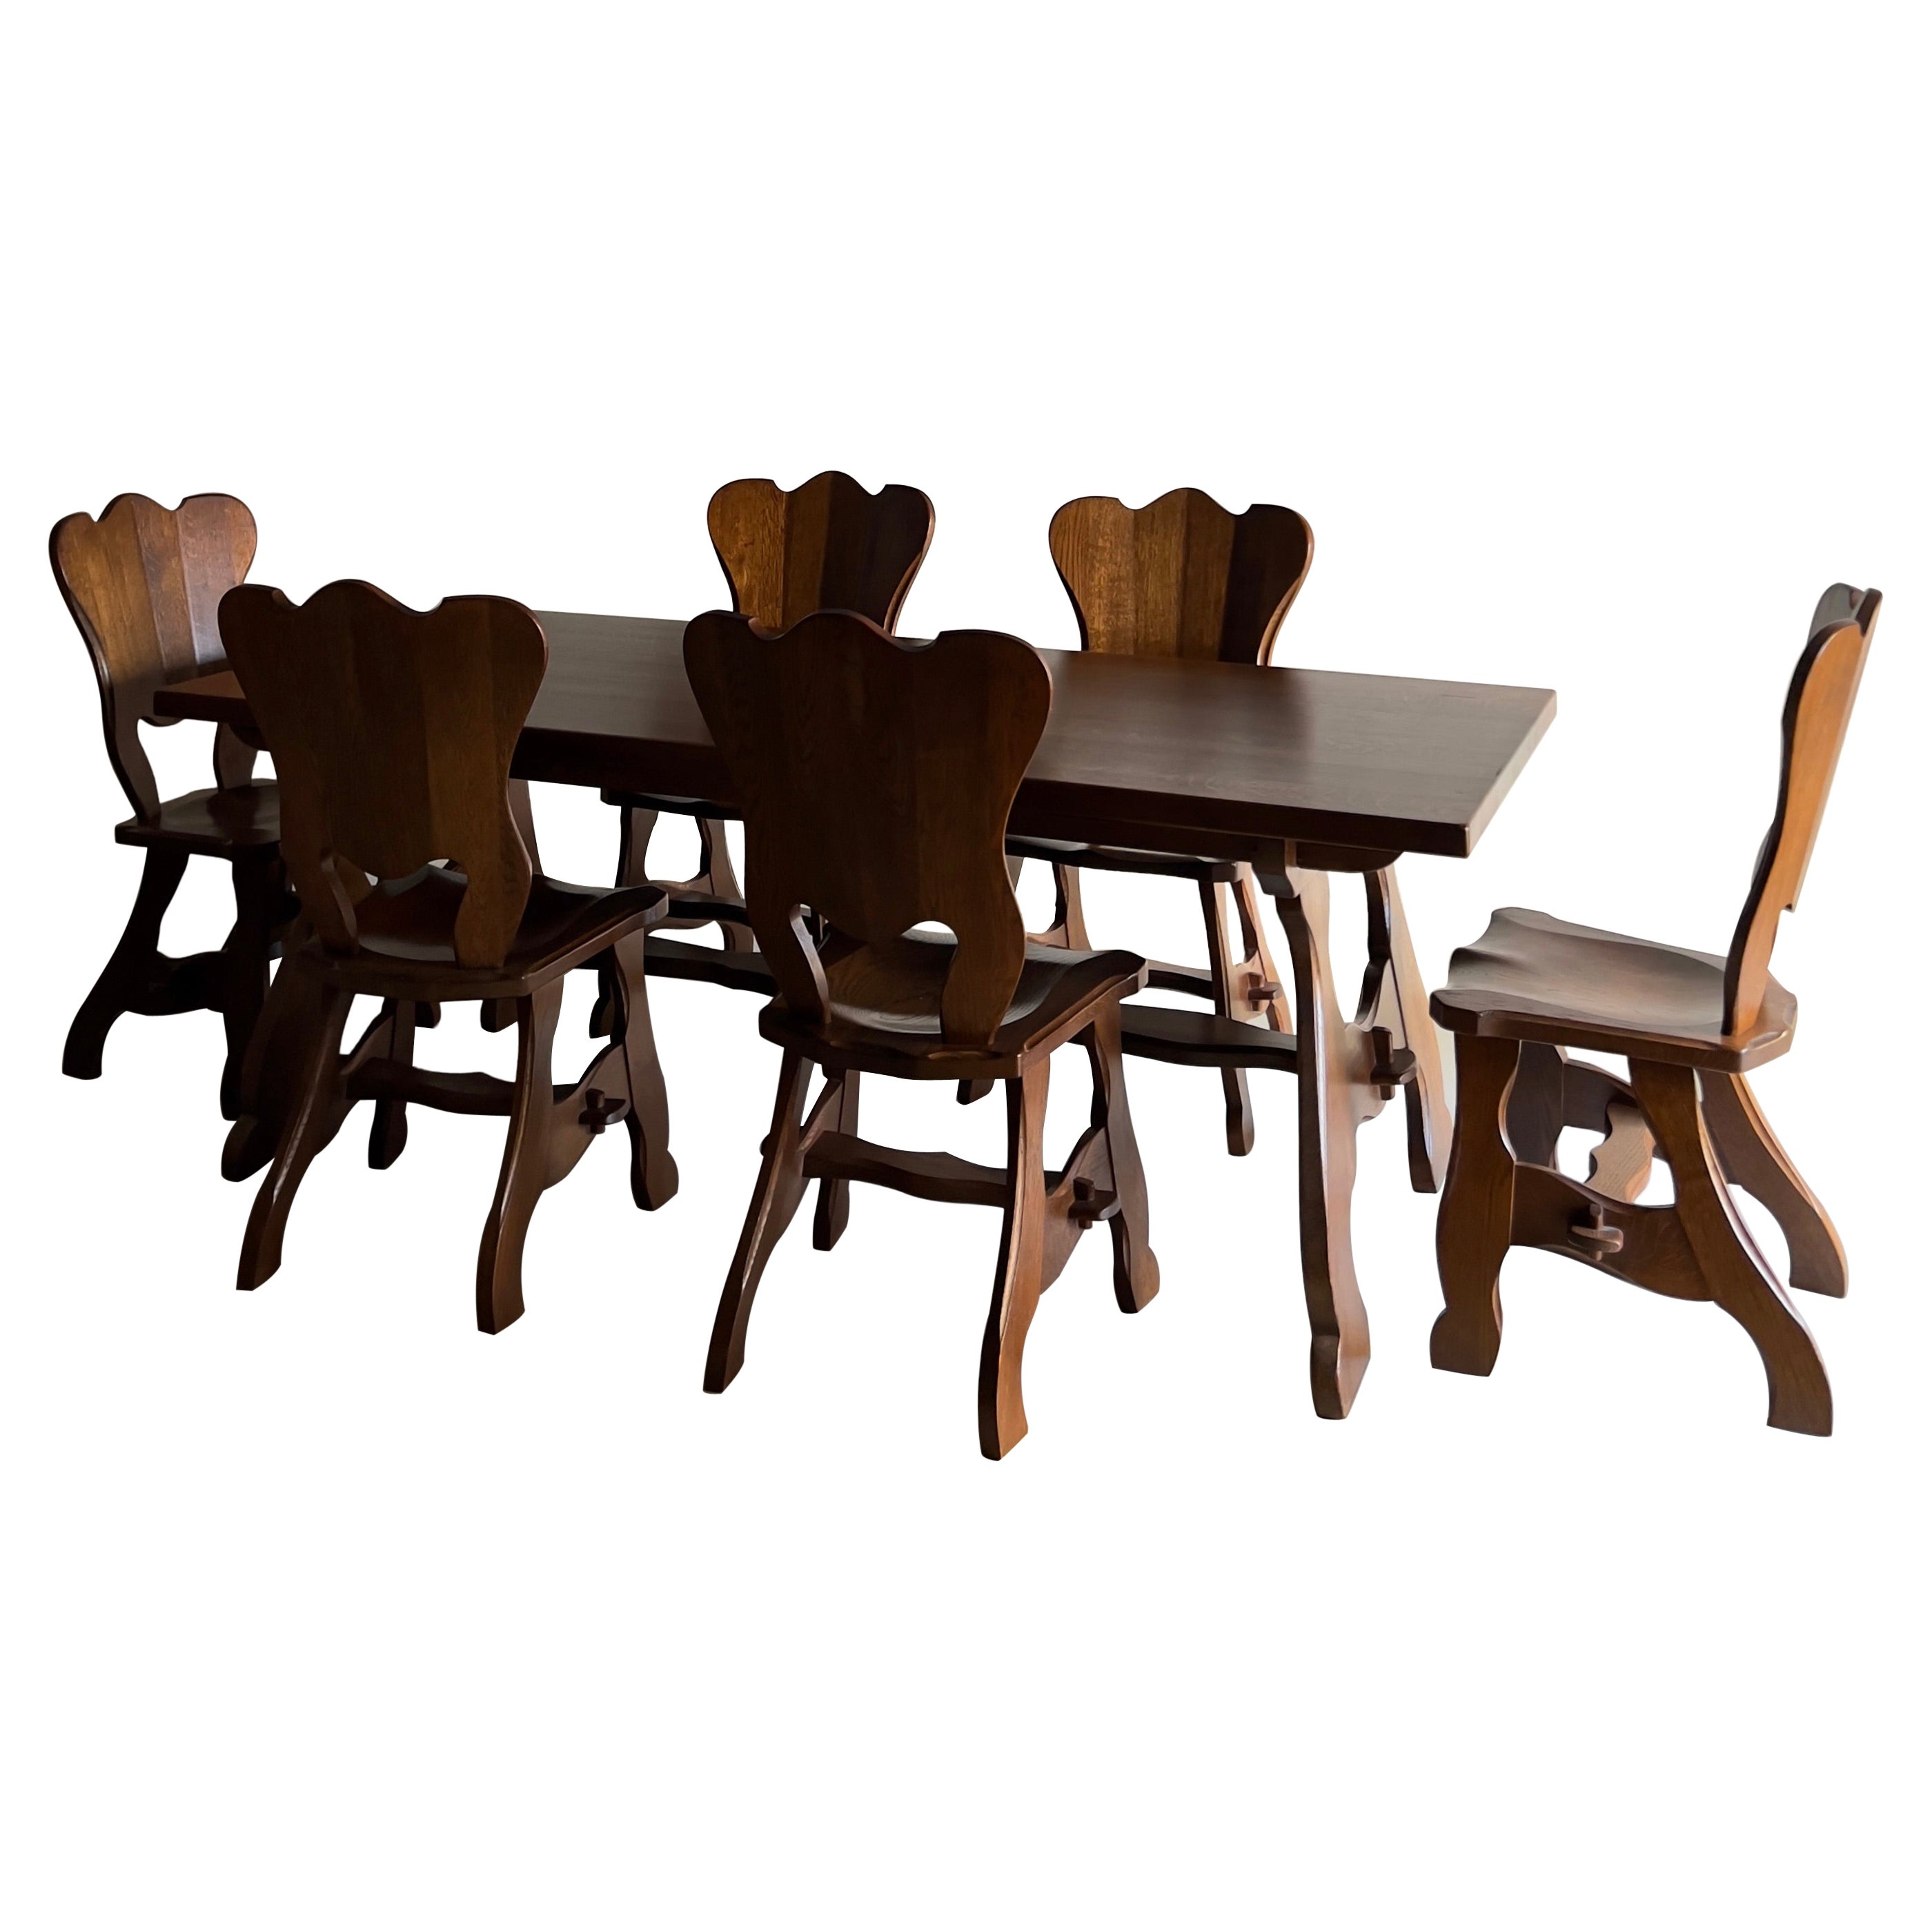 Brutalist Oak Dining Table Set with Six Chairs, Netherlands, 1970s